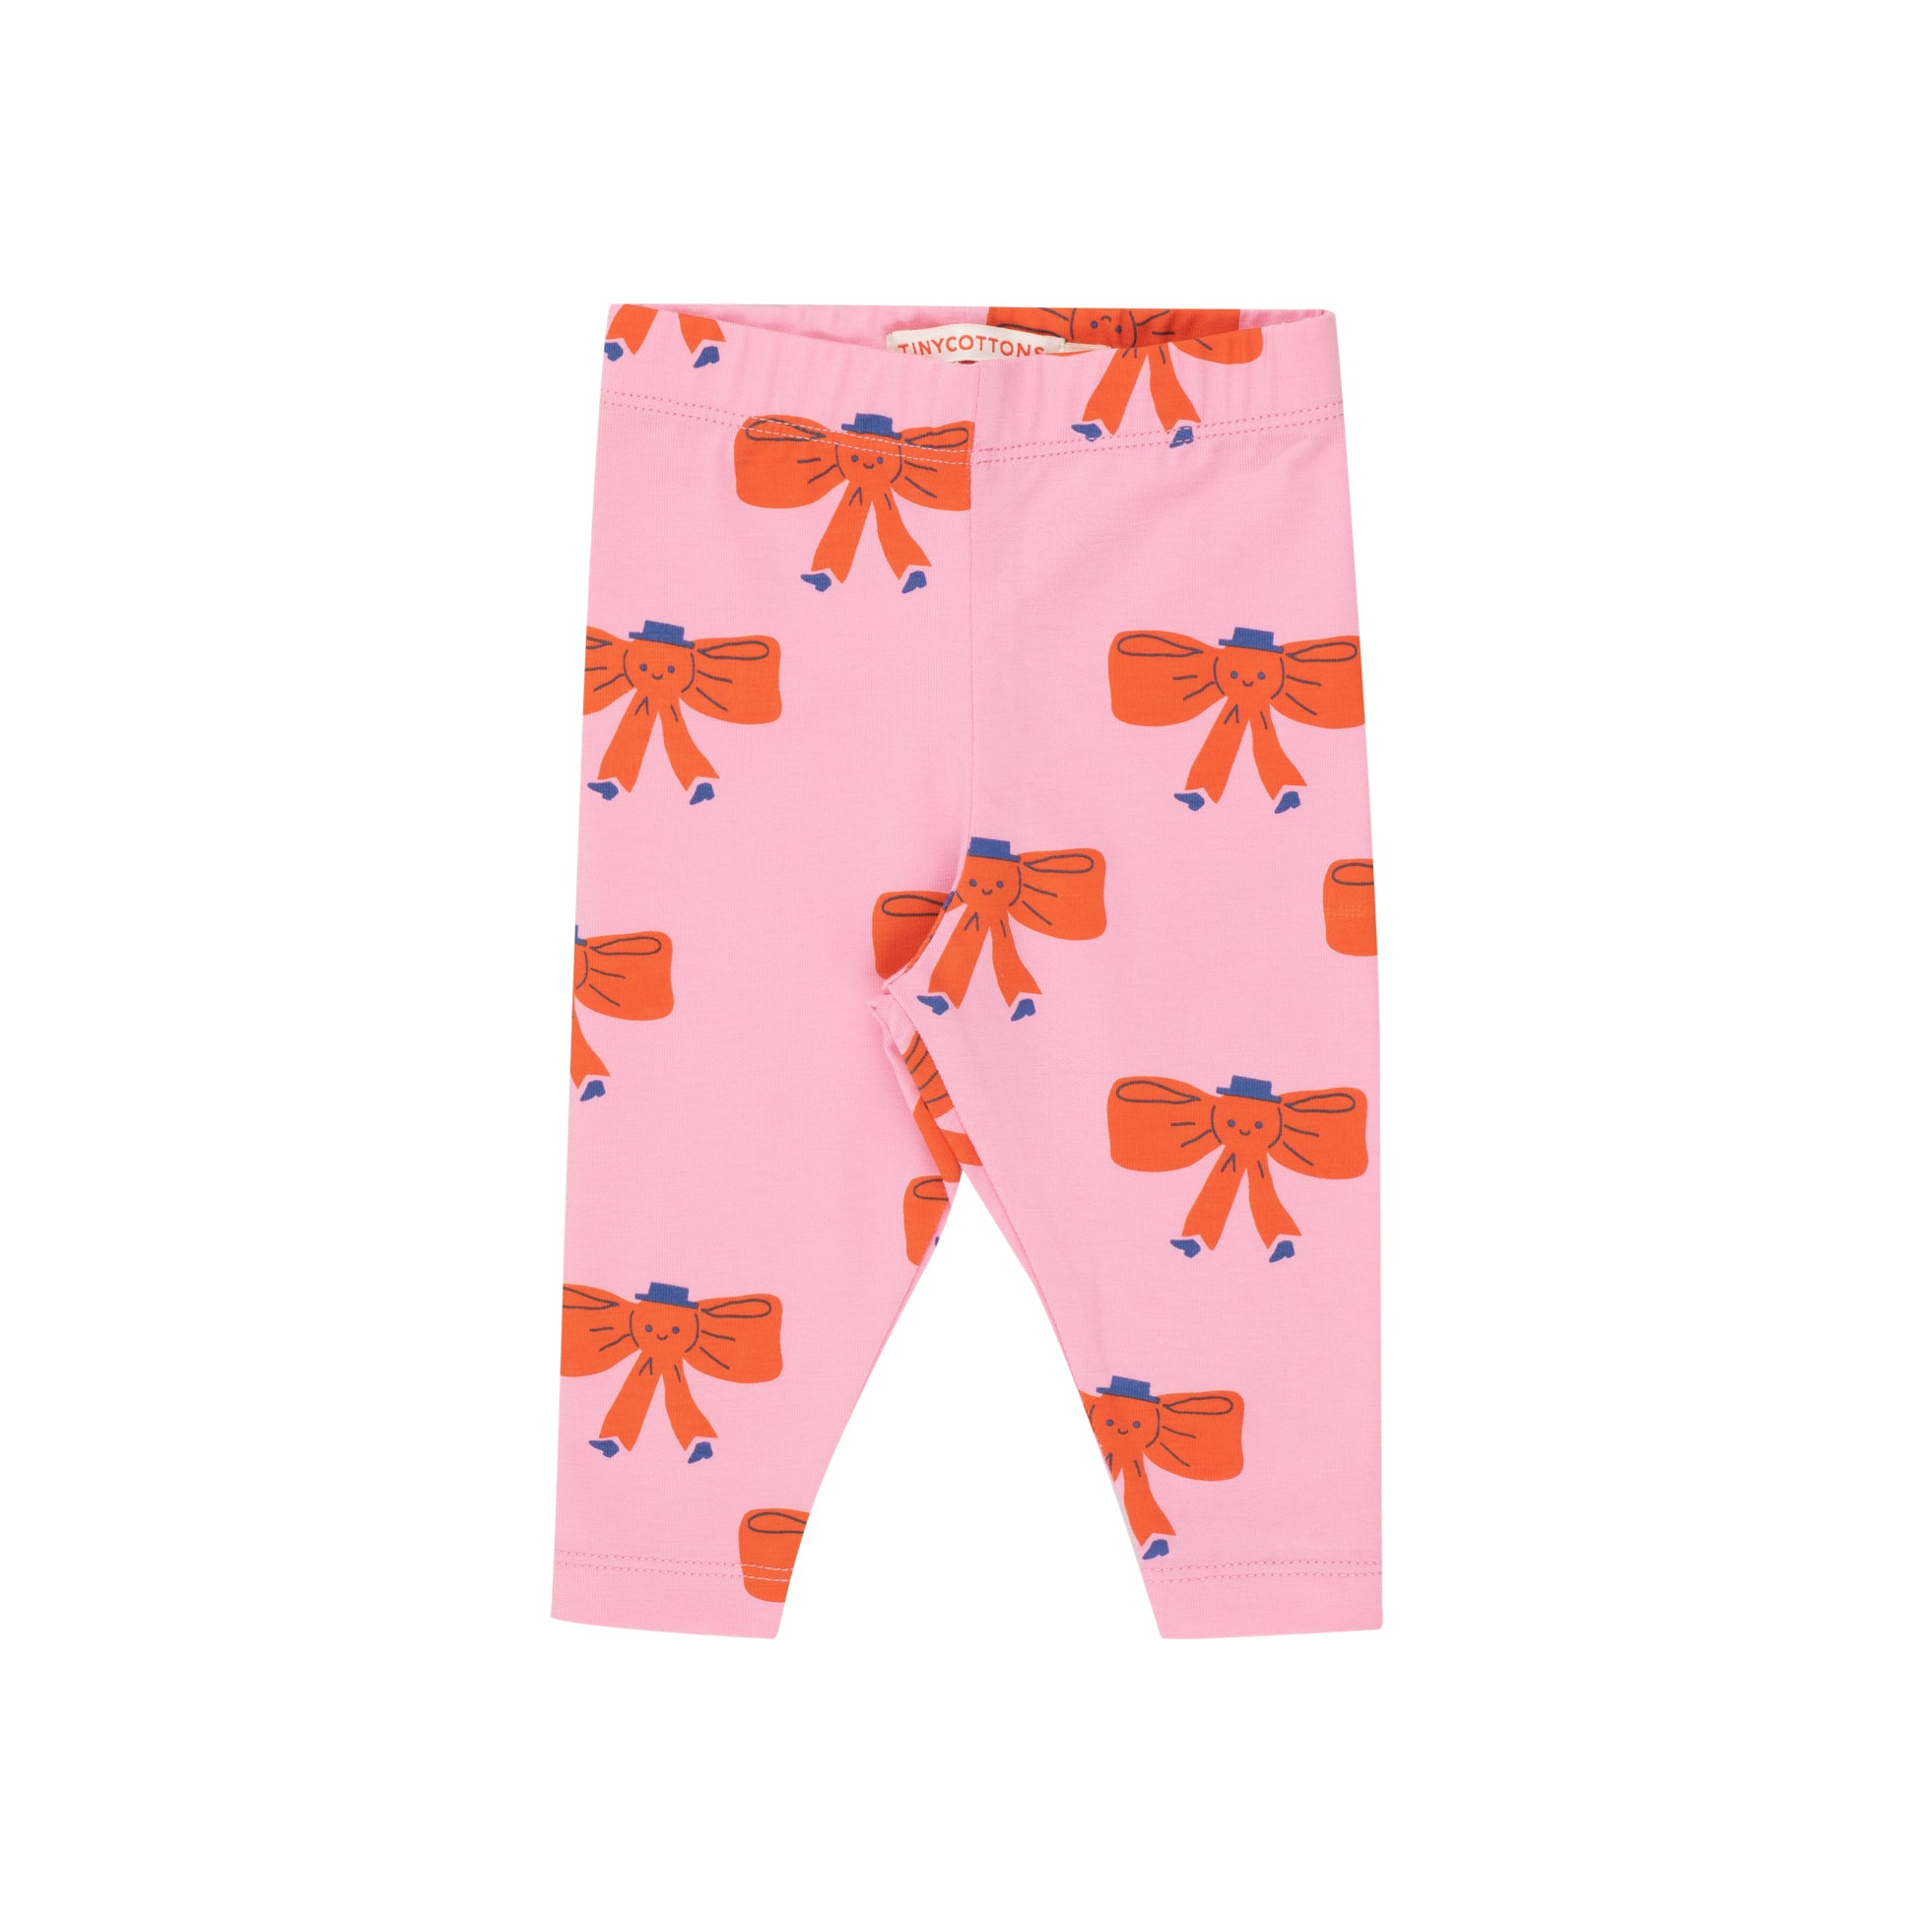 Tiny Bow Baby Pant – pink